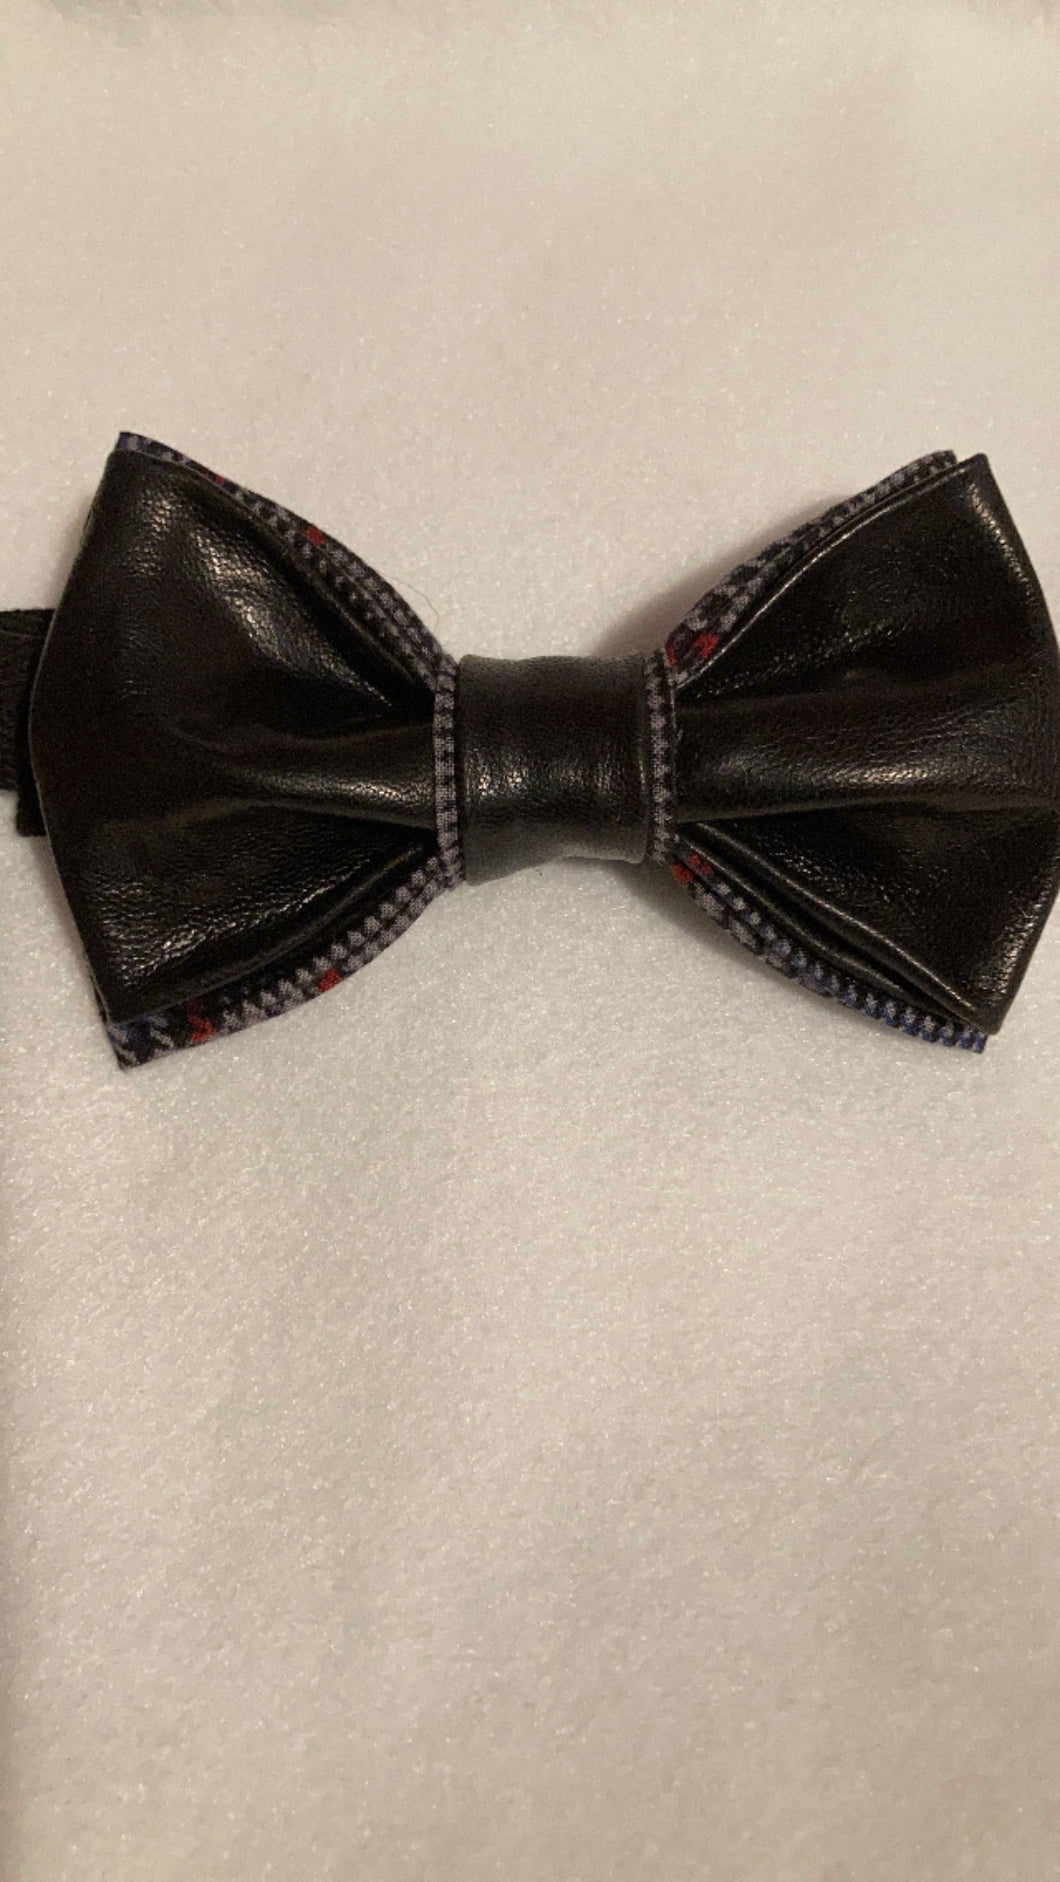 Beautiful butter smooth black leather bow tie